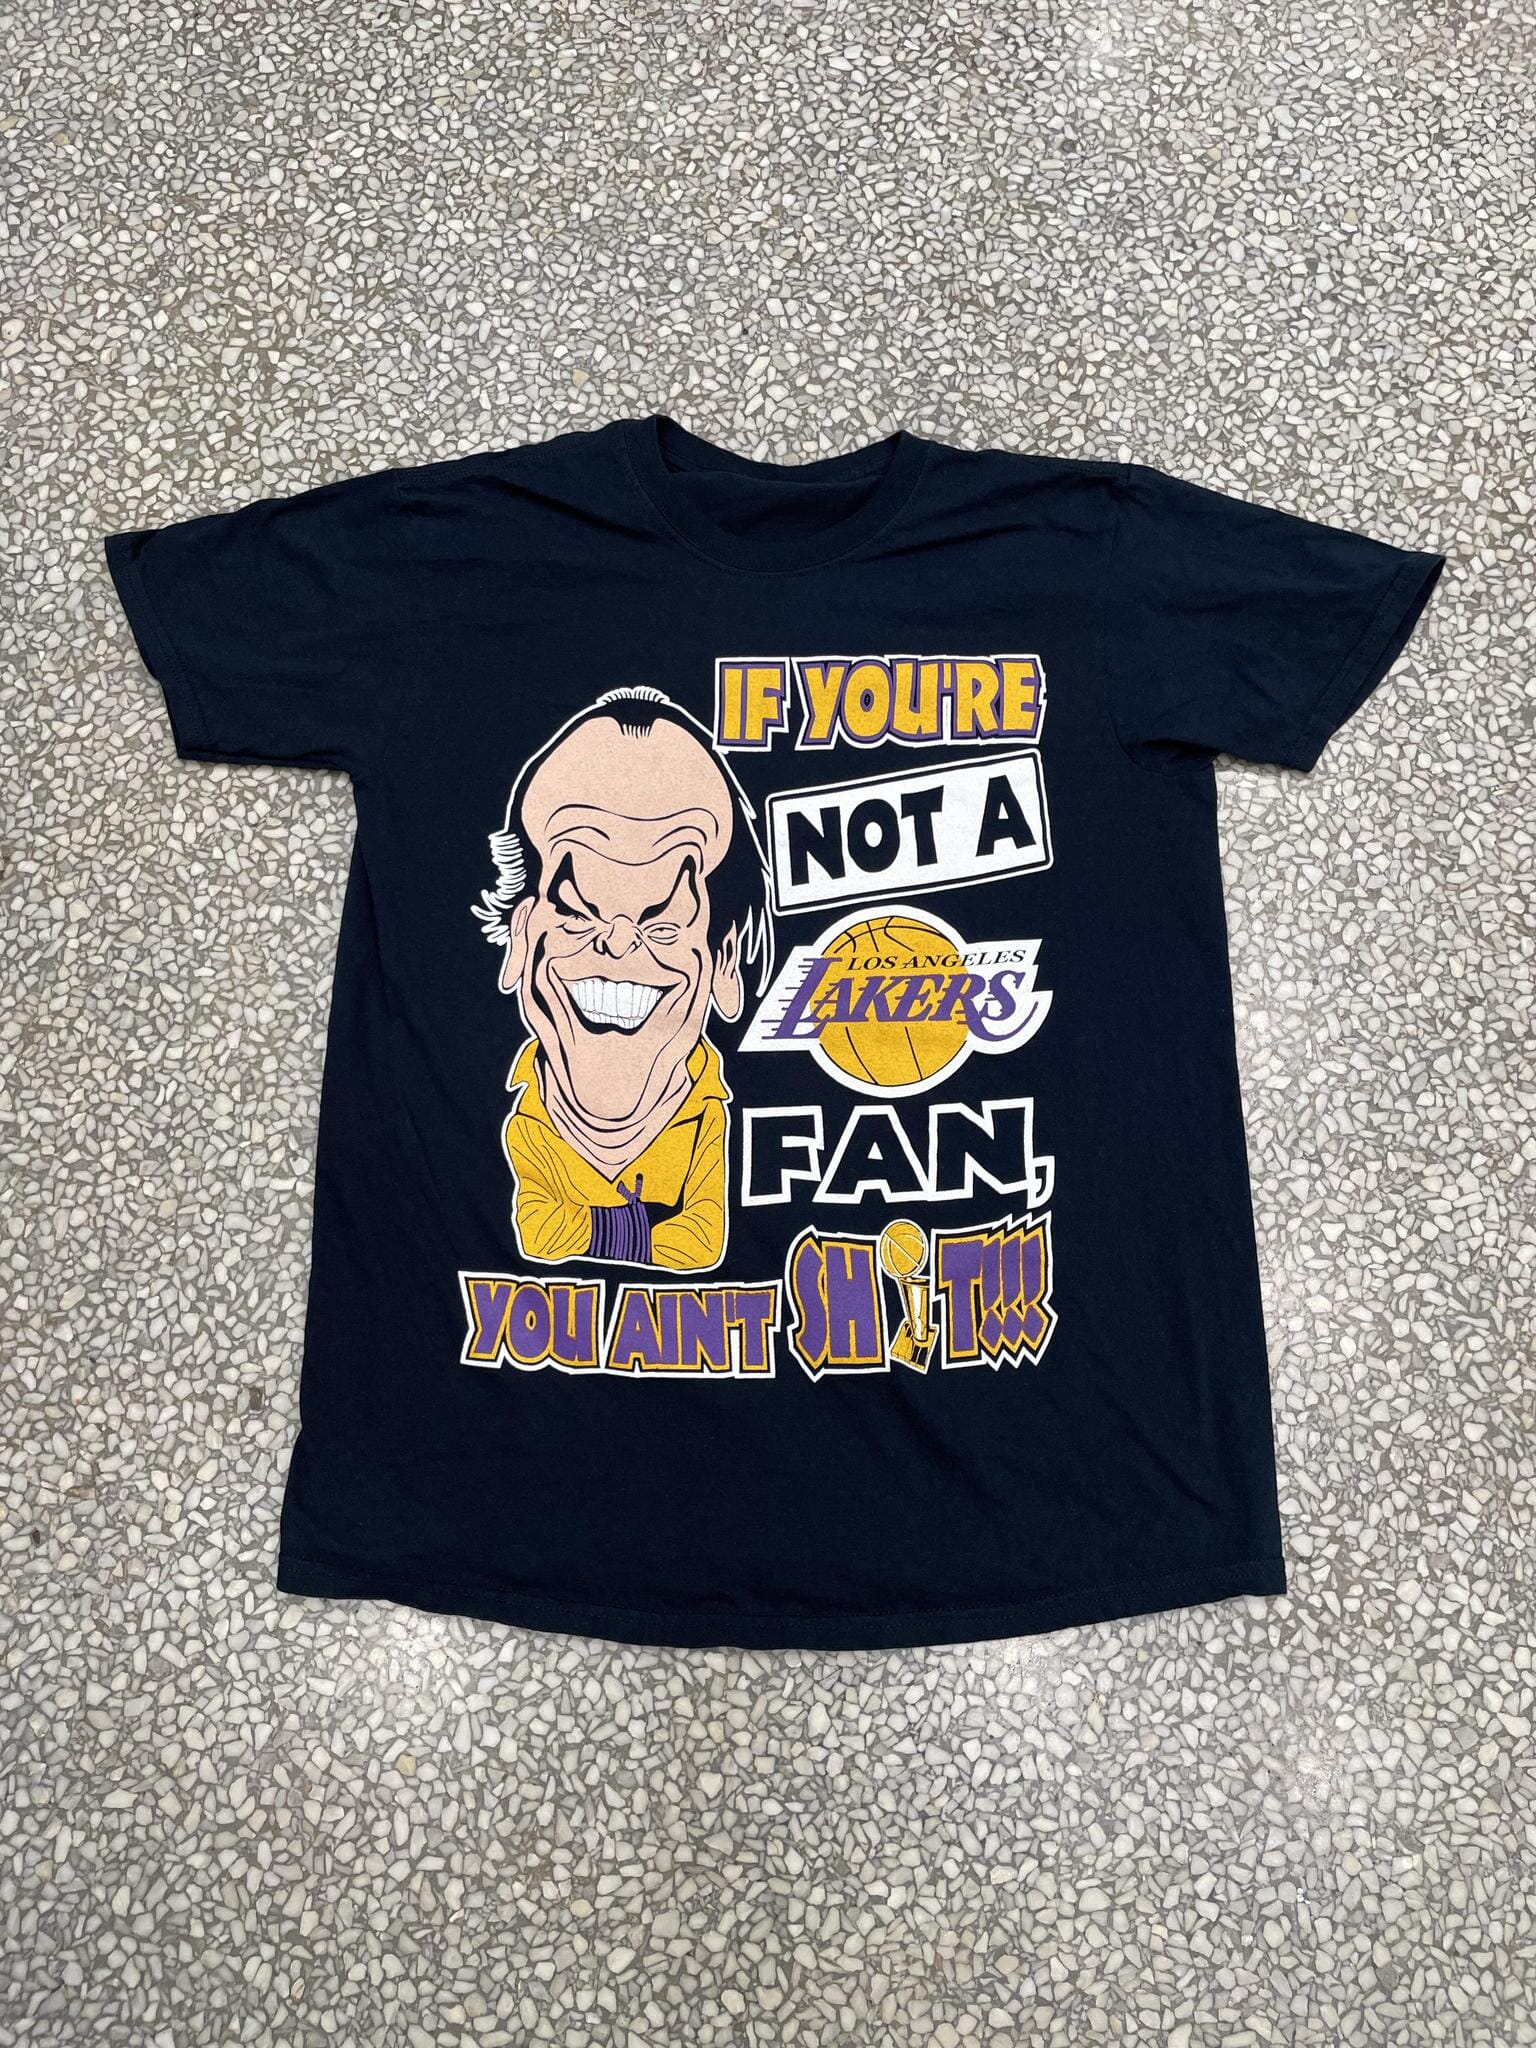 Lakers Merch, Lakers Fans Official Merch